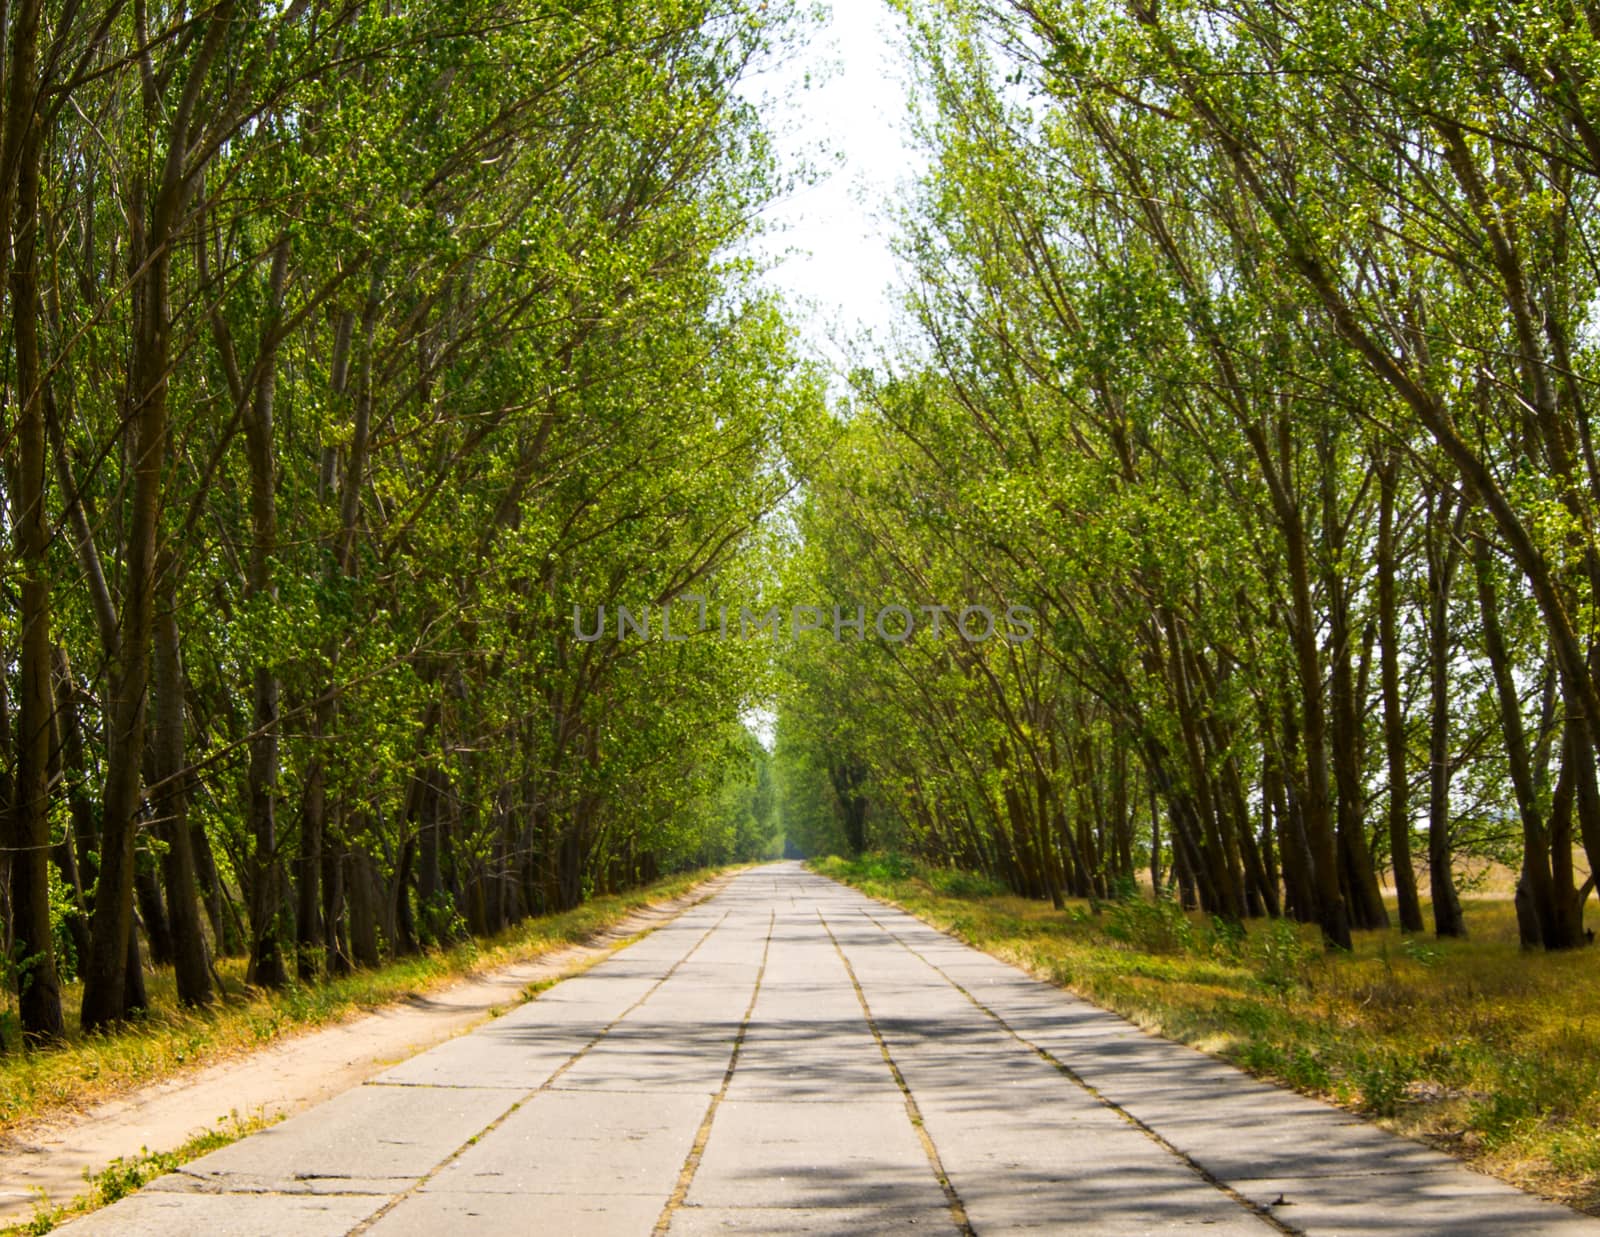 Country road running through tree alley. For your commercial and editorial use.